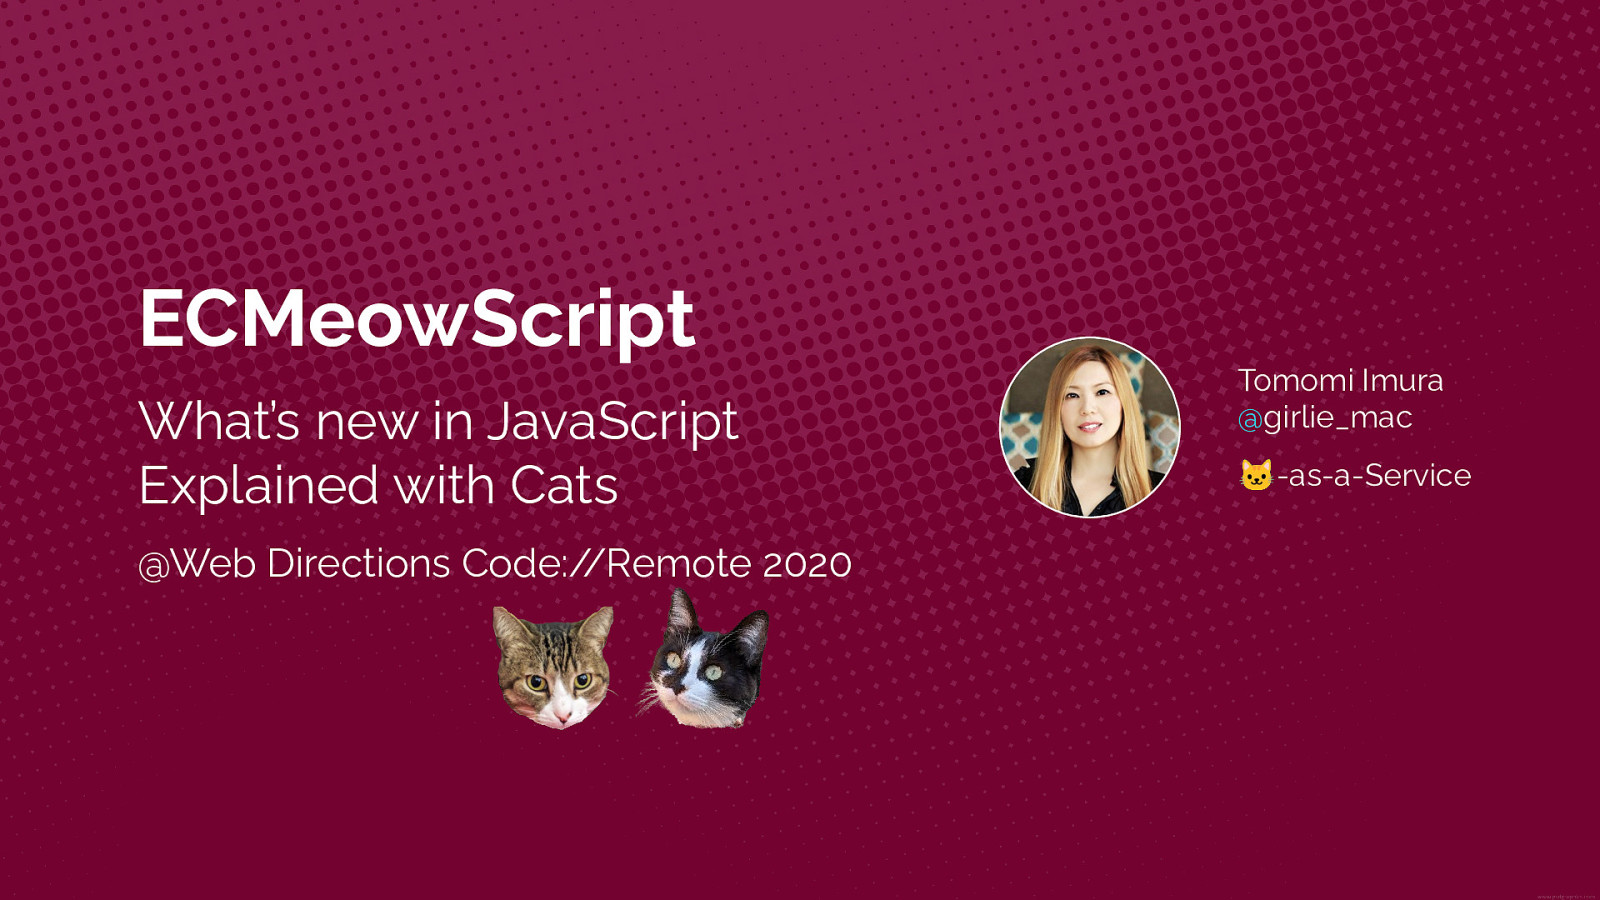 ECMeowScript - What’s New in JavaScript Explained with Cats